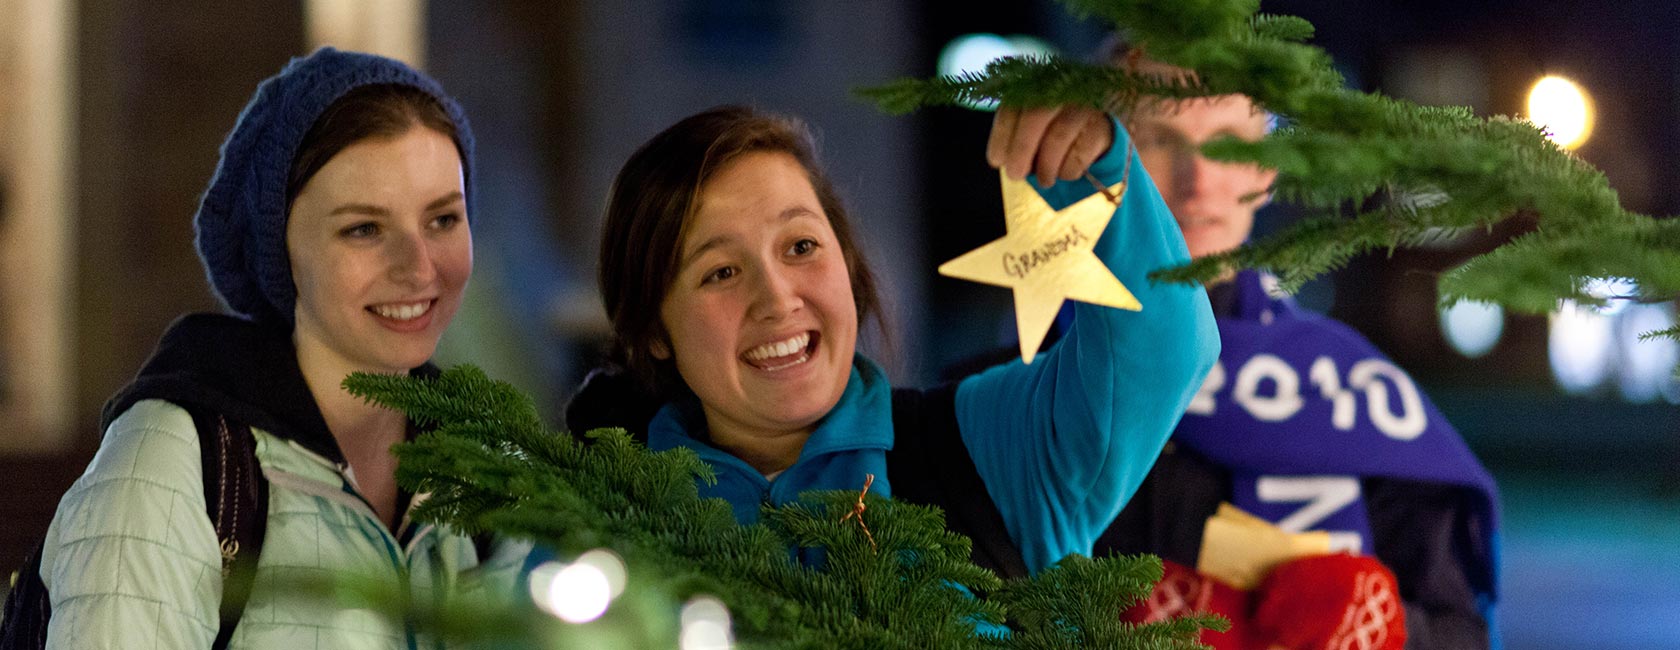 Christmas tree lighting in Red Square at PLU on Wednesday, Dec. 3, 2014. (PLU Photo/John Froschauer)